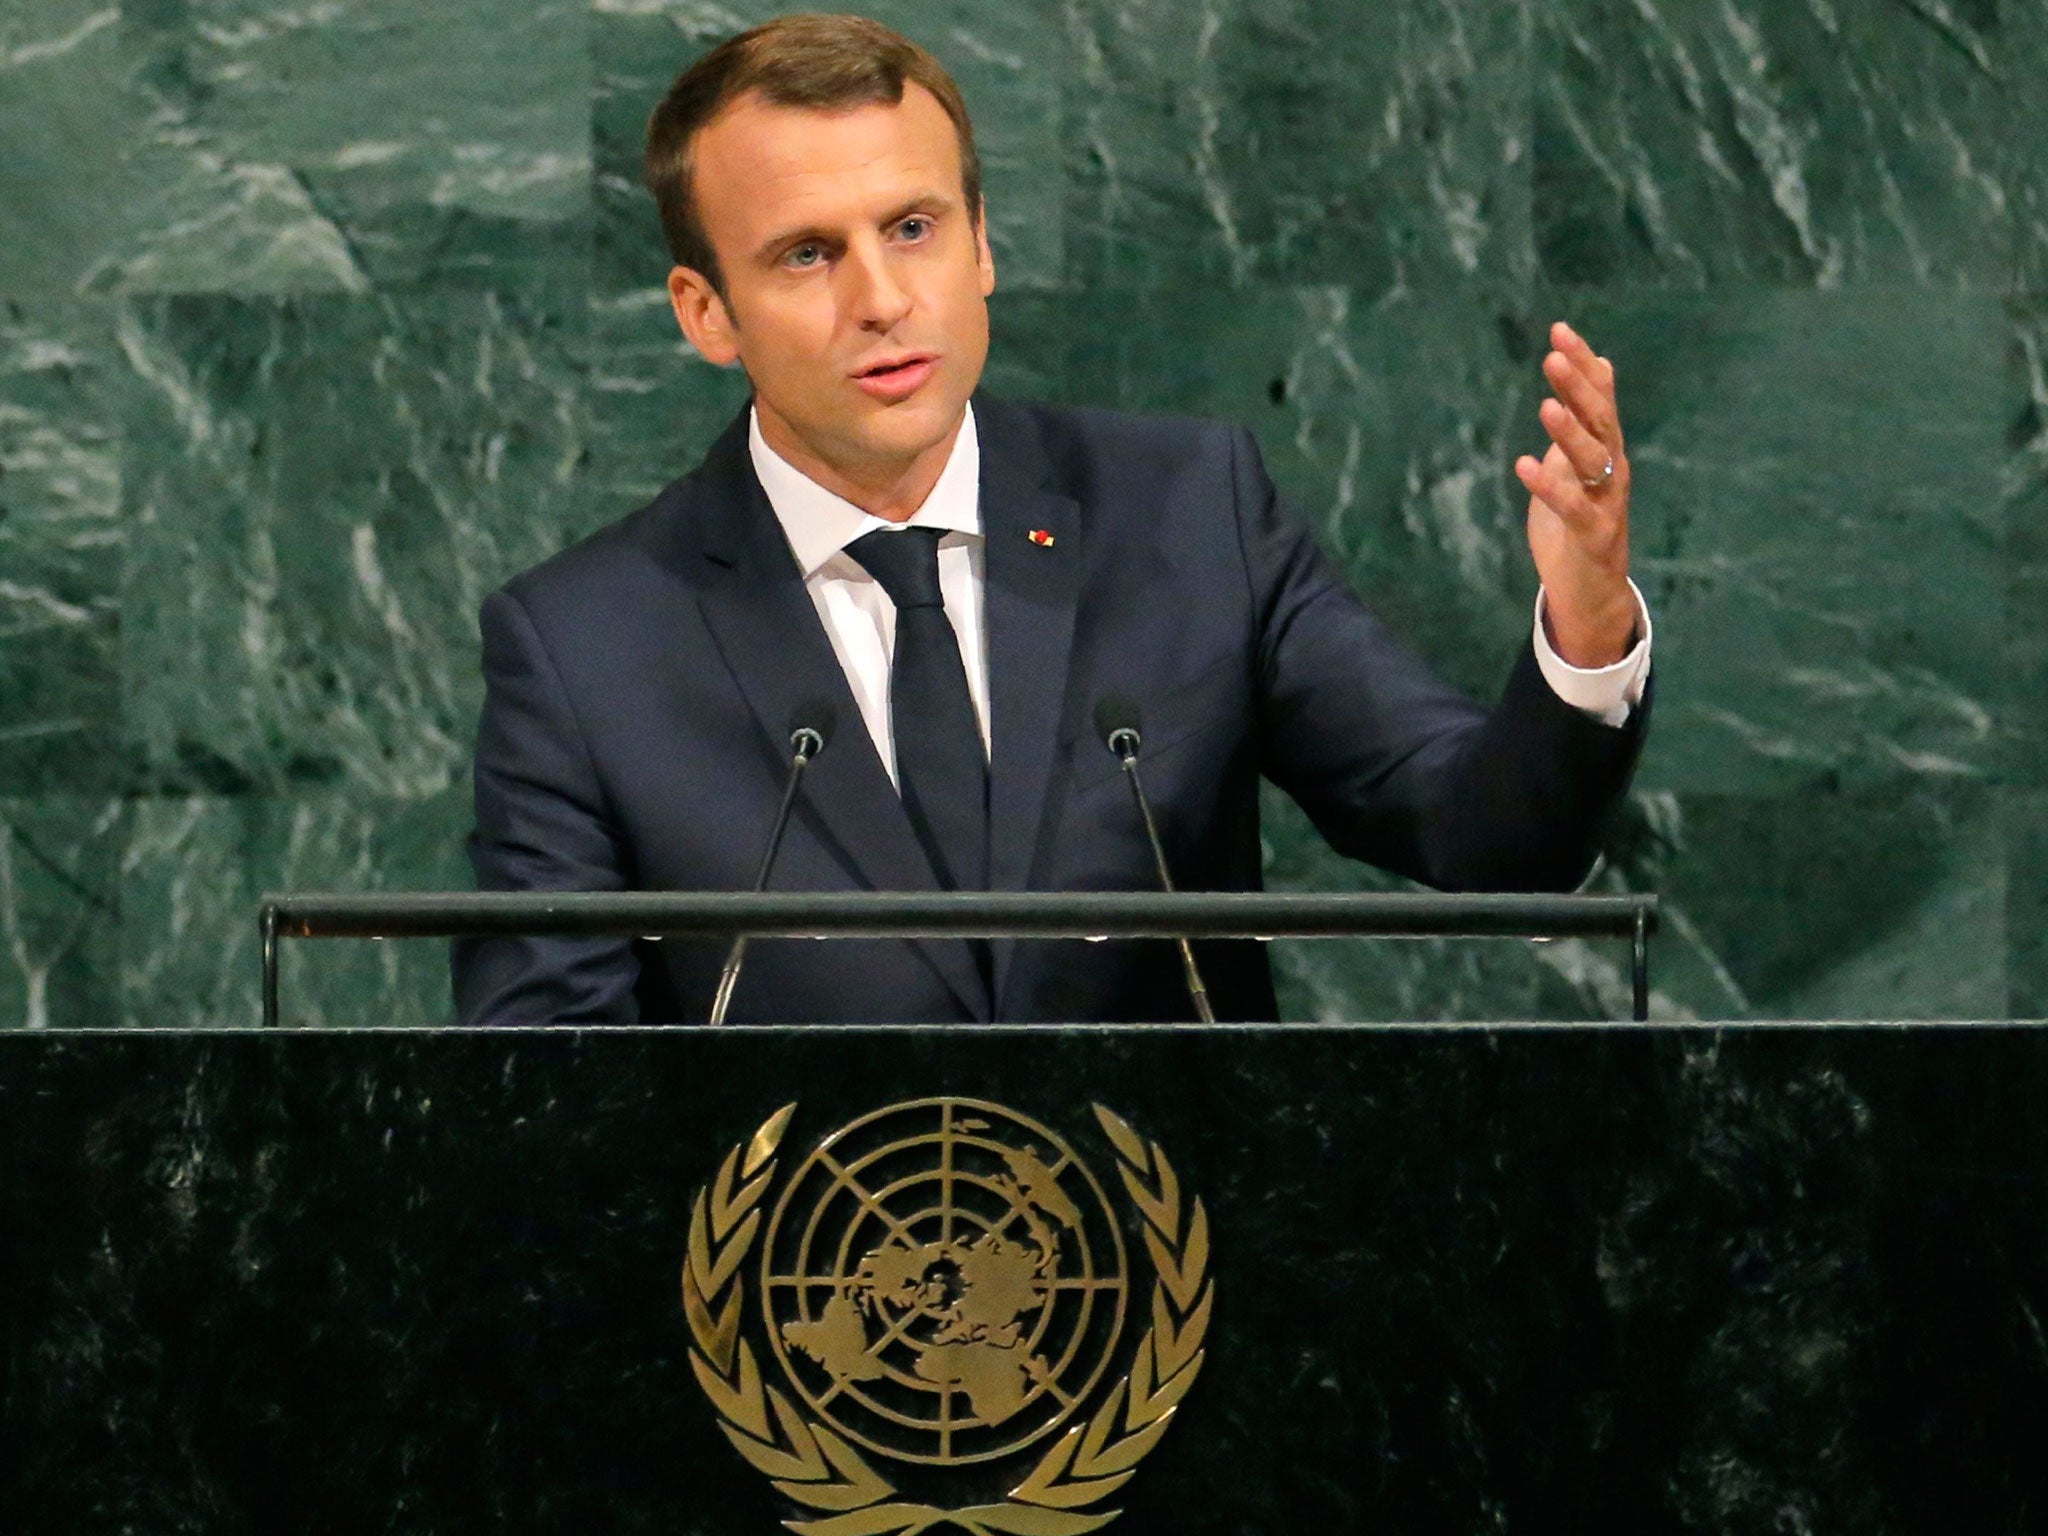 Emmanuel Macron addresses the 72nd United Nations General Assembly at UN headquarters in New York